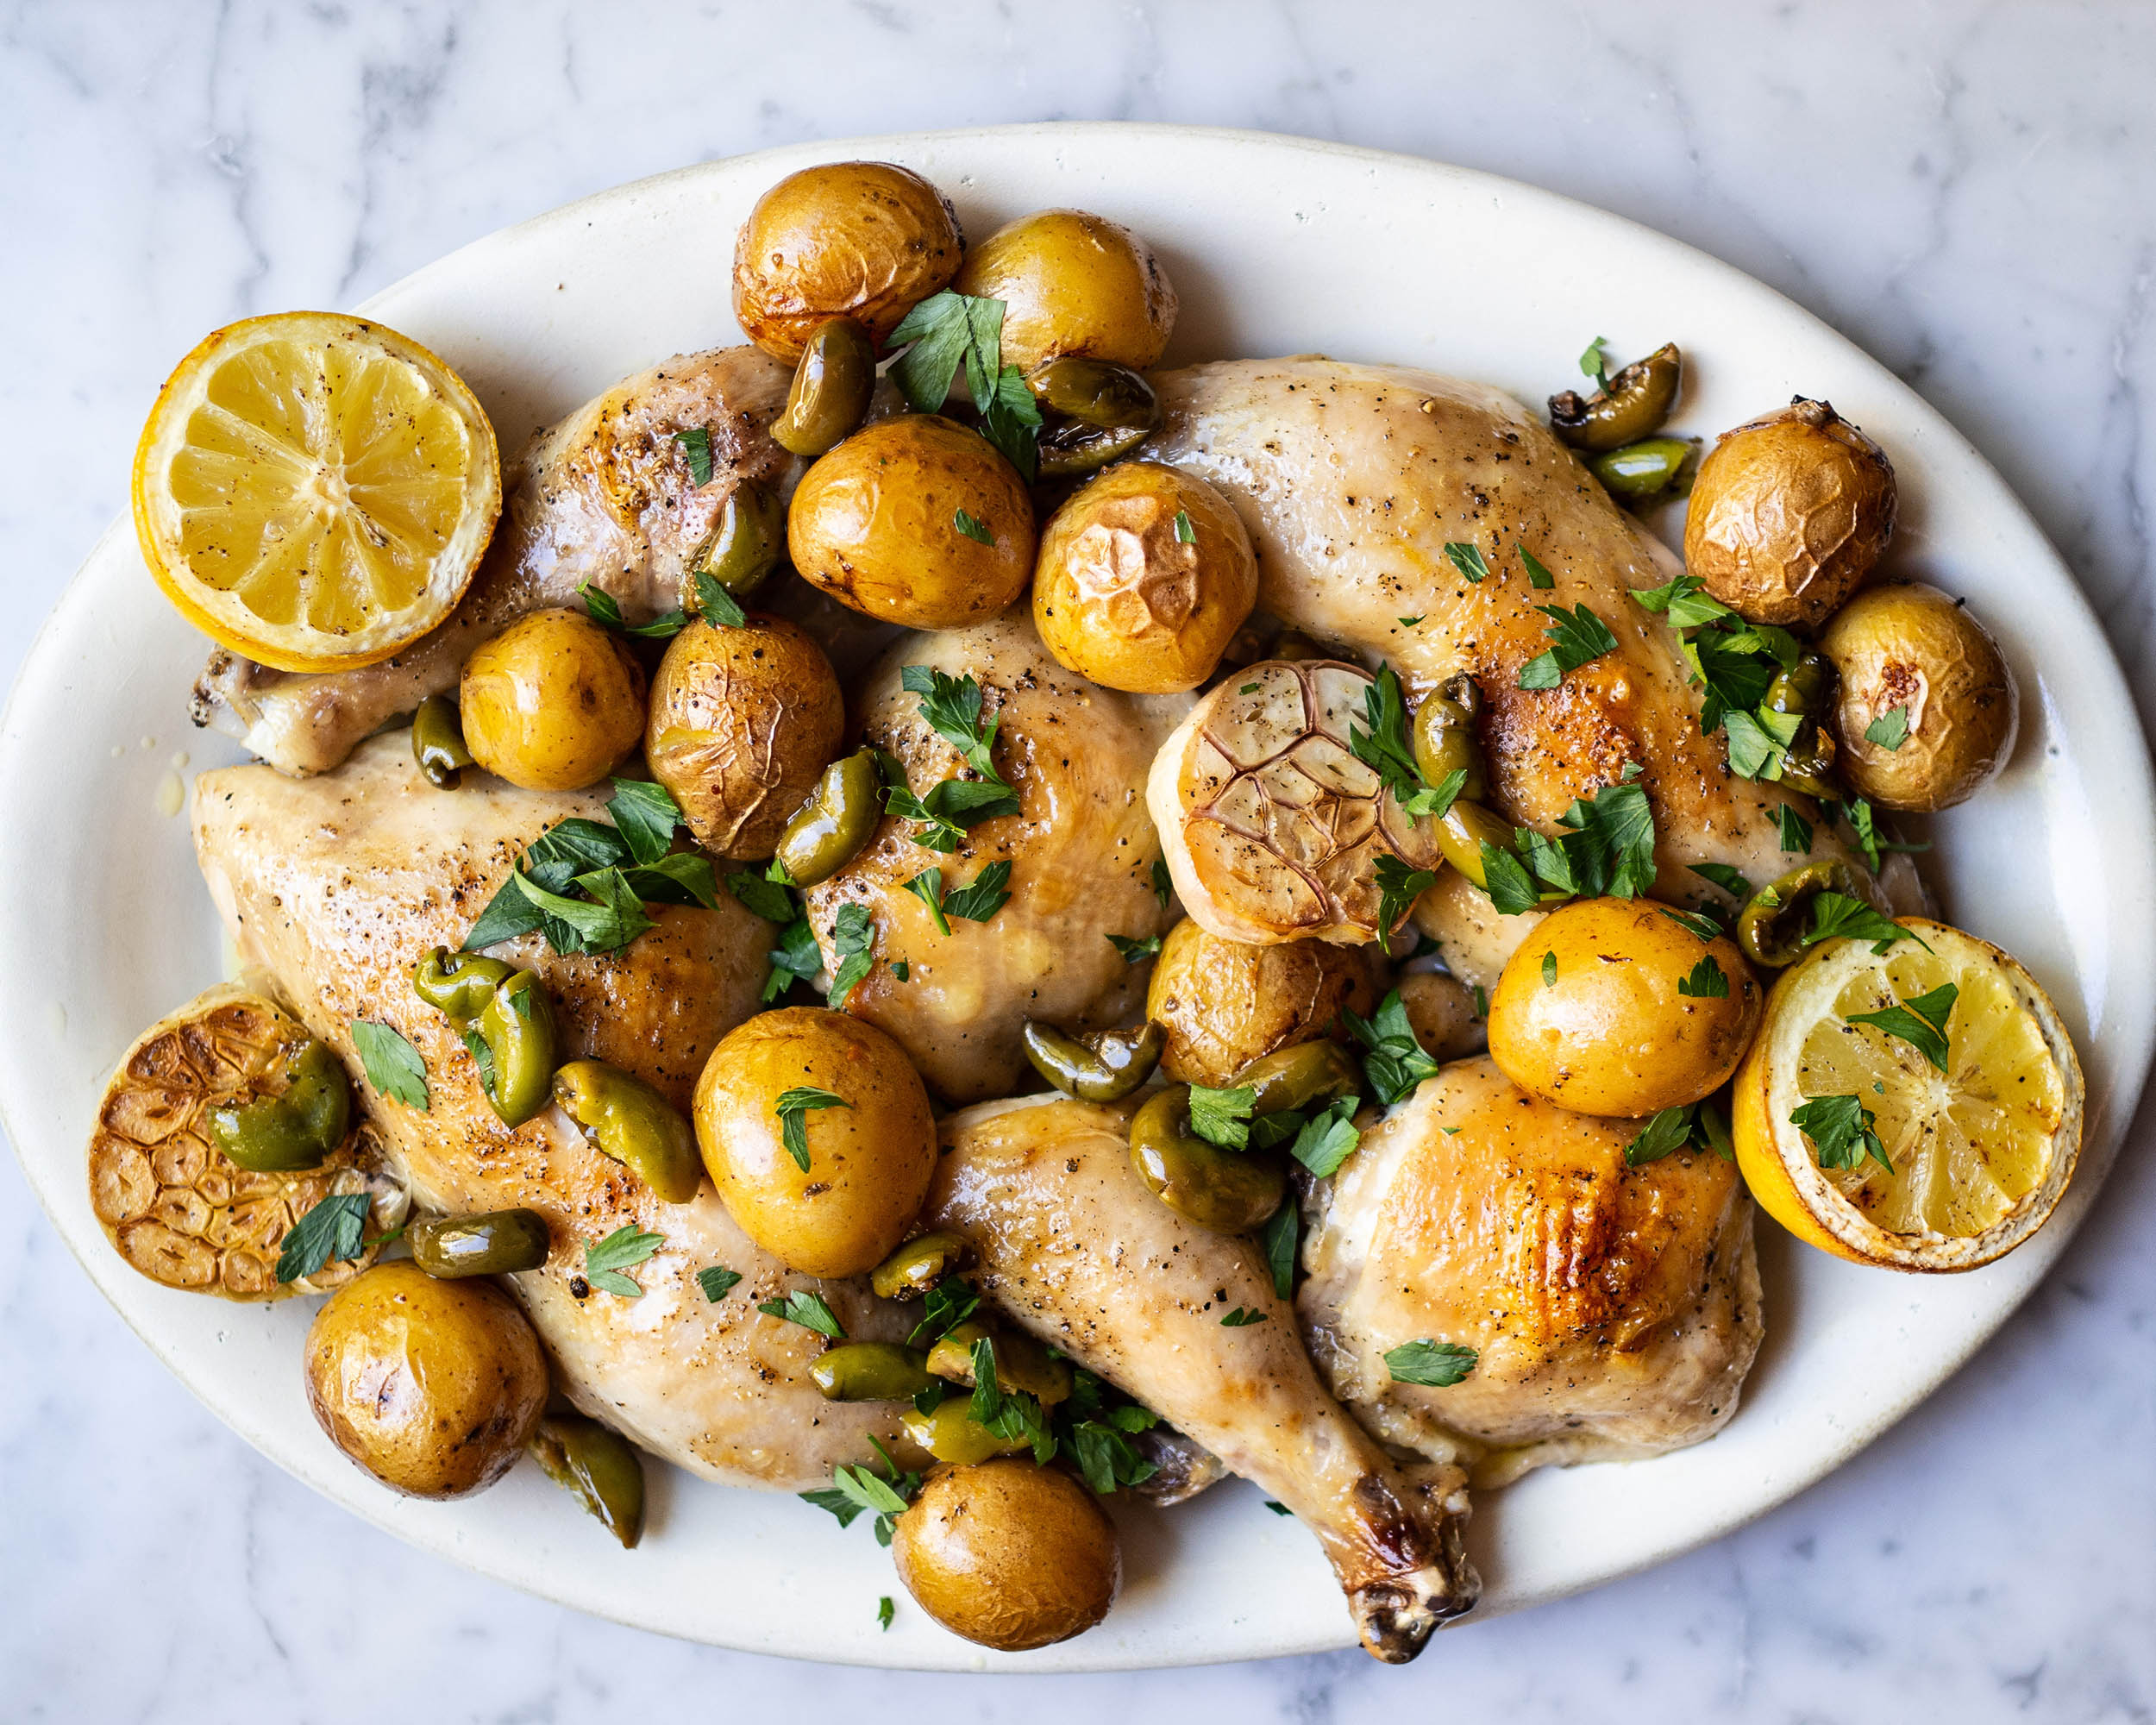 Olive-Oil Confit Chicken with the Lemon, Potatoes, Green Olives + Herbs Image